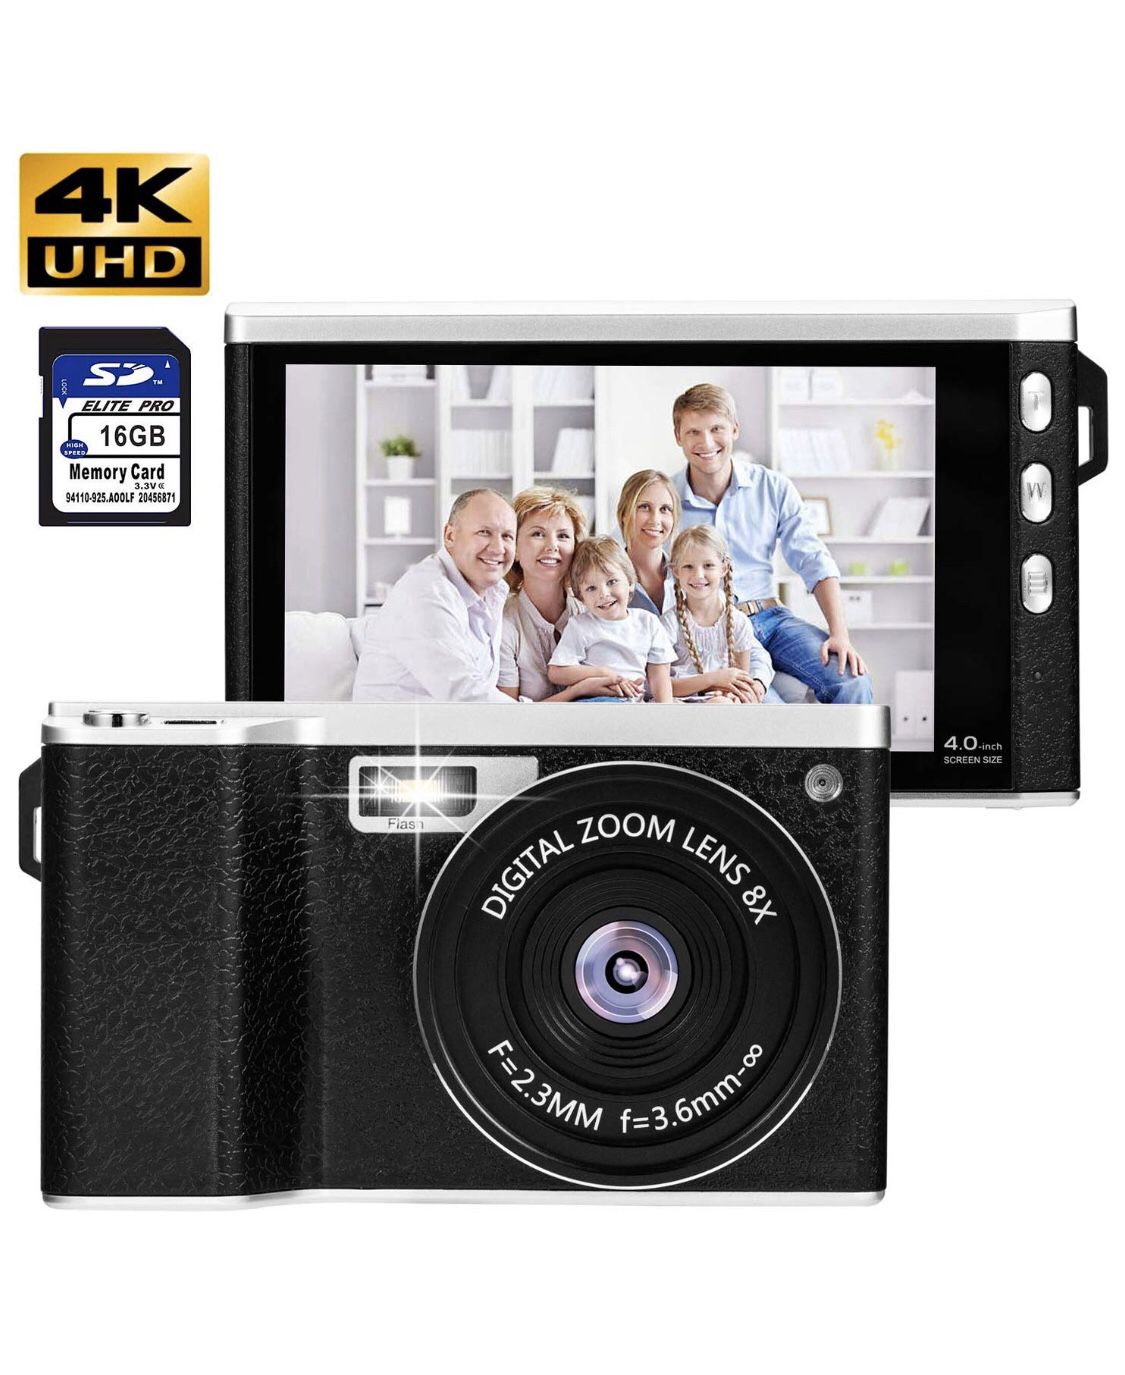 New 4K Digital Camera with extra lense and SD card